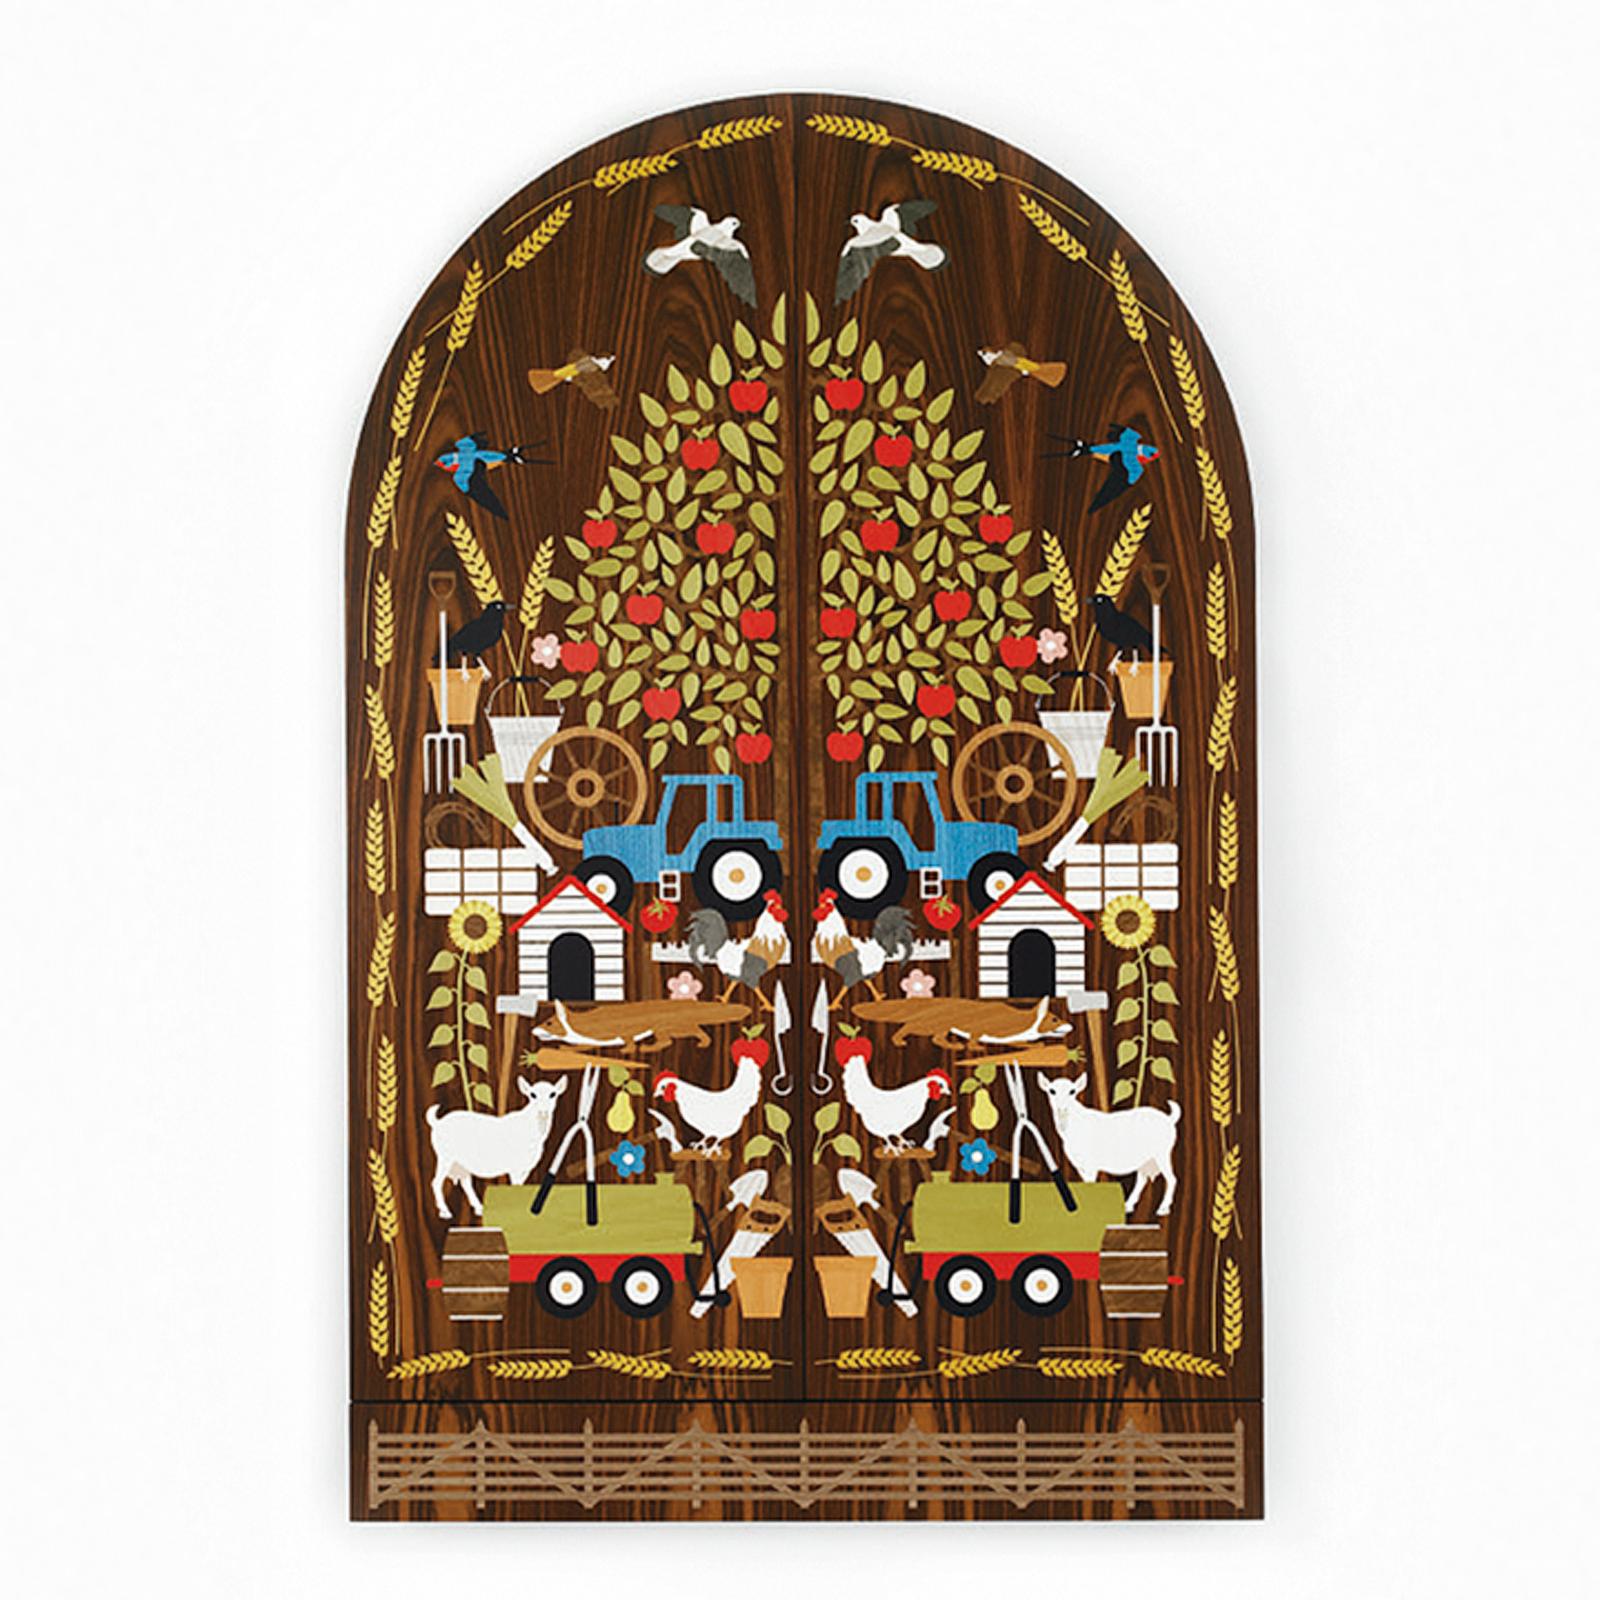 Bavaria mirror is from a suite of five marquetry furnishings featuring intricate and multicolored laser-cut inlays in a farm motif. Seventeen different brilliantly colored dyes are used in creating the inlays made from a variety of wood types